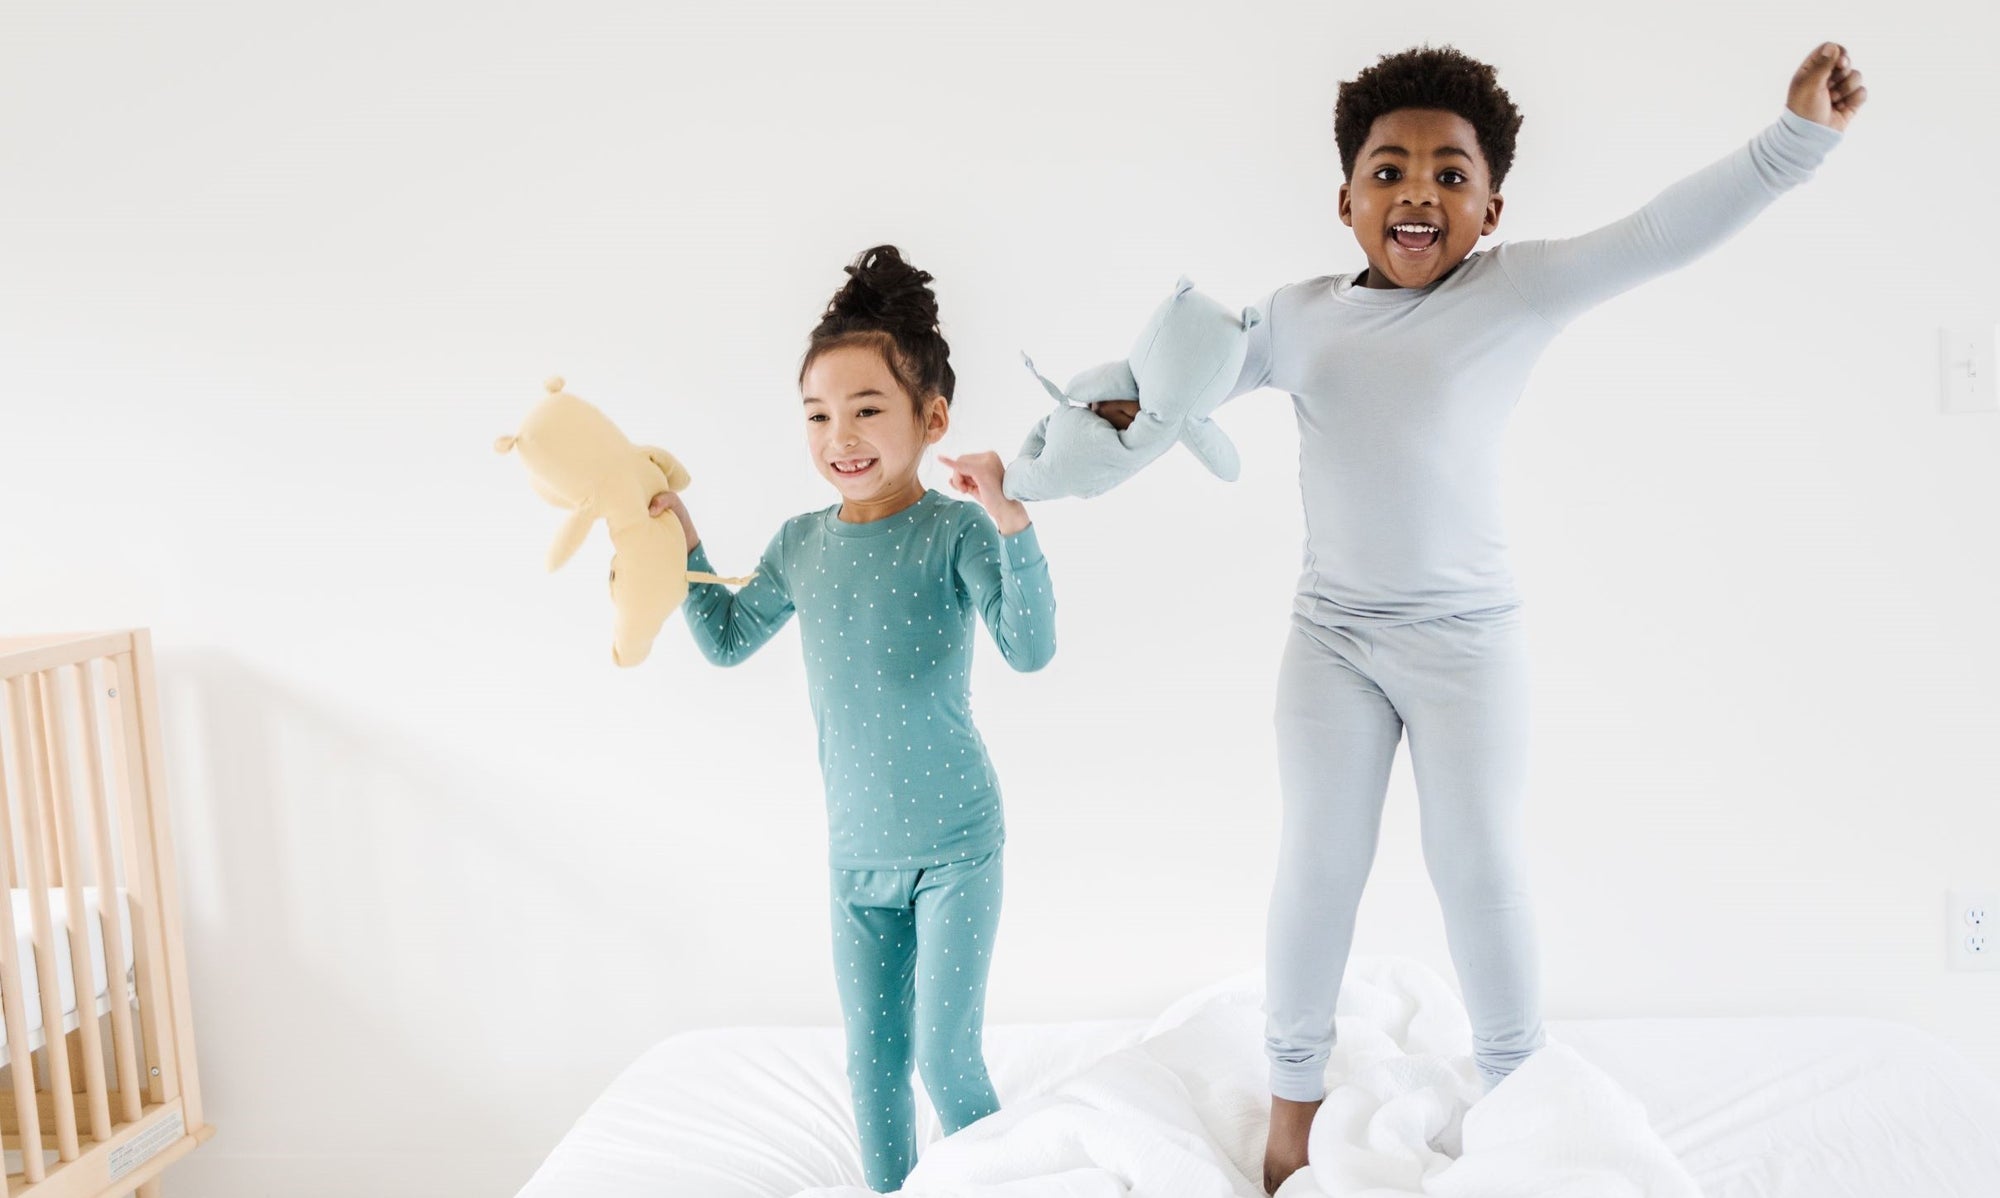 A boy and girl jumping on a bed in pj's